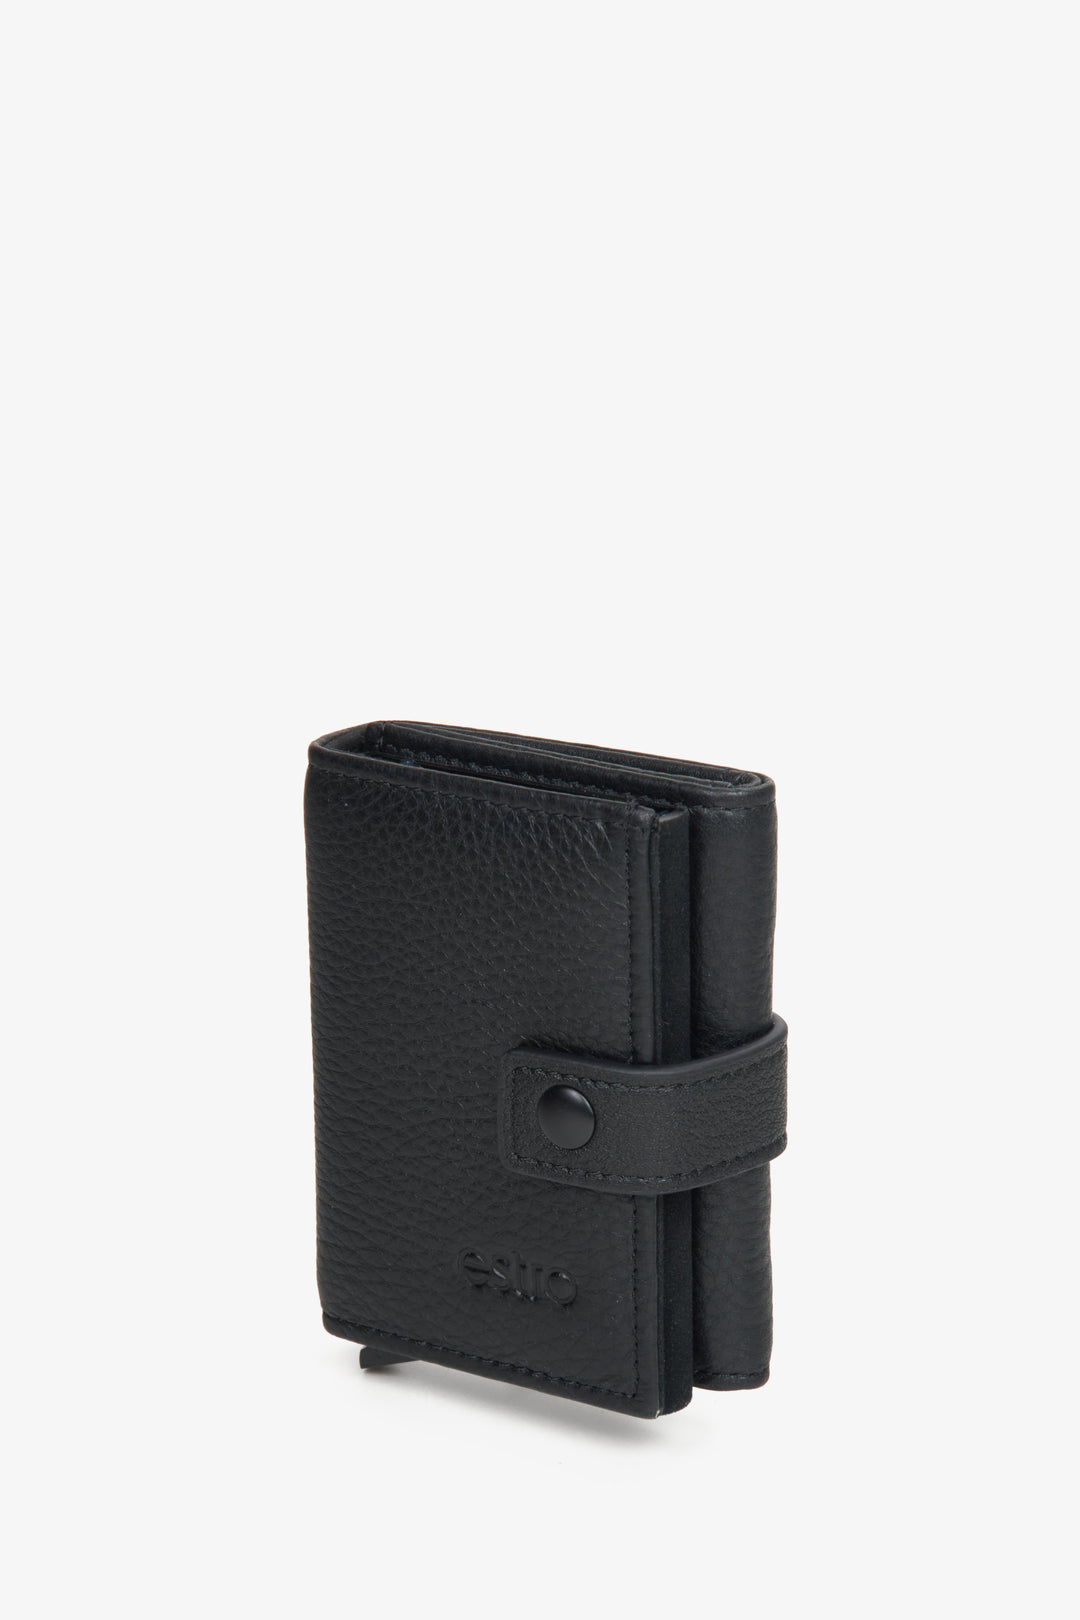 Men's Small Black Leather Wallet with Buckle Estro ER00114462.